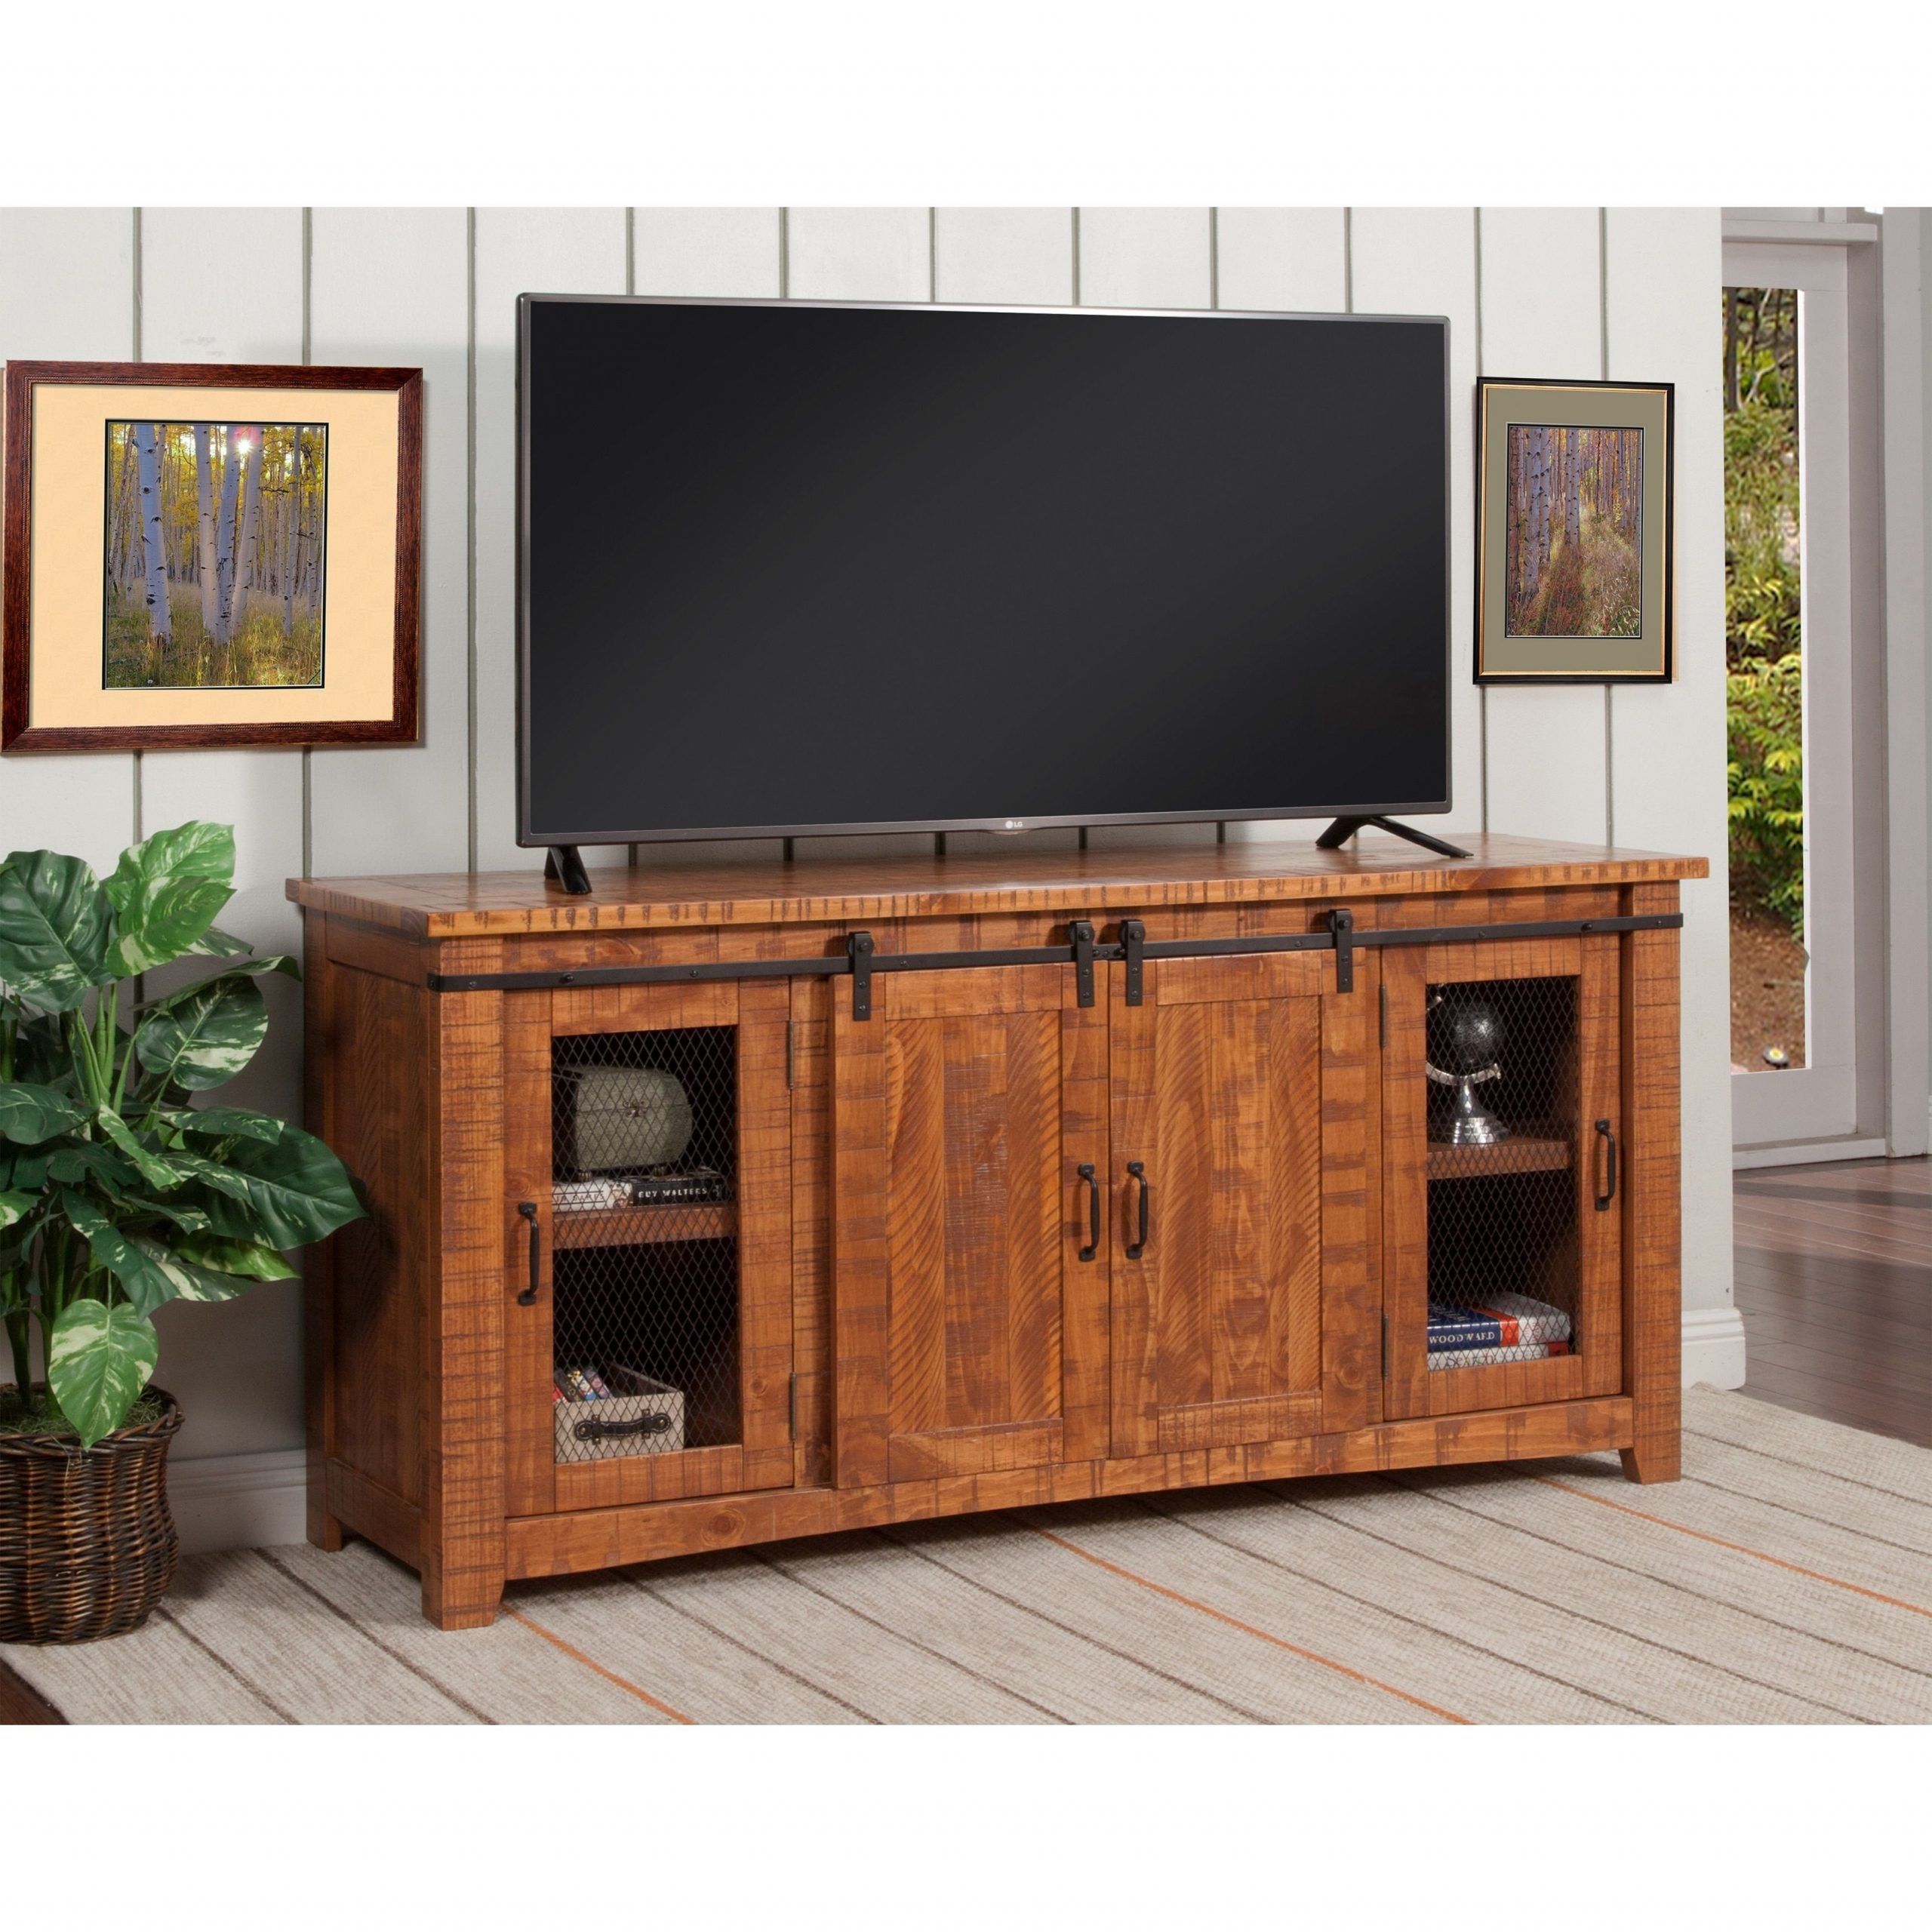 Online Shopping – Bedding, Furniture, Electronics, Jewelry Within Solid Wood Black Tv Stands (View 2 of 15)